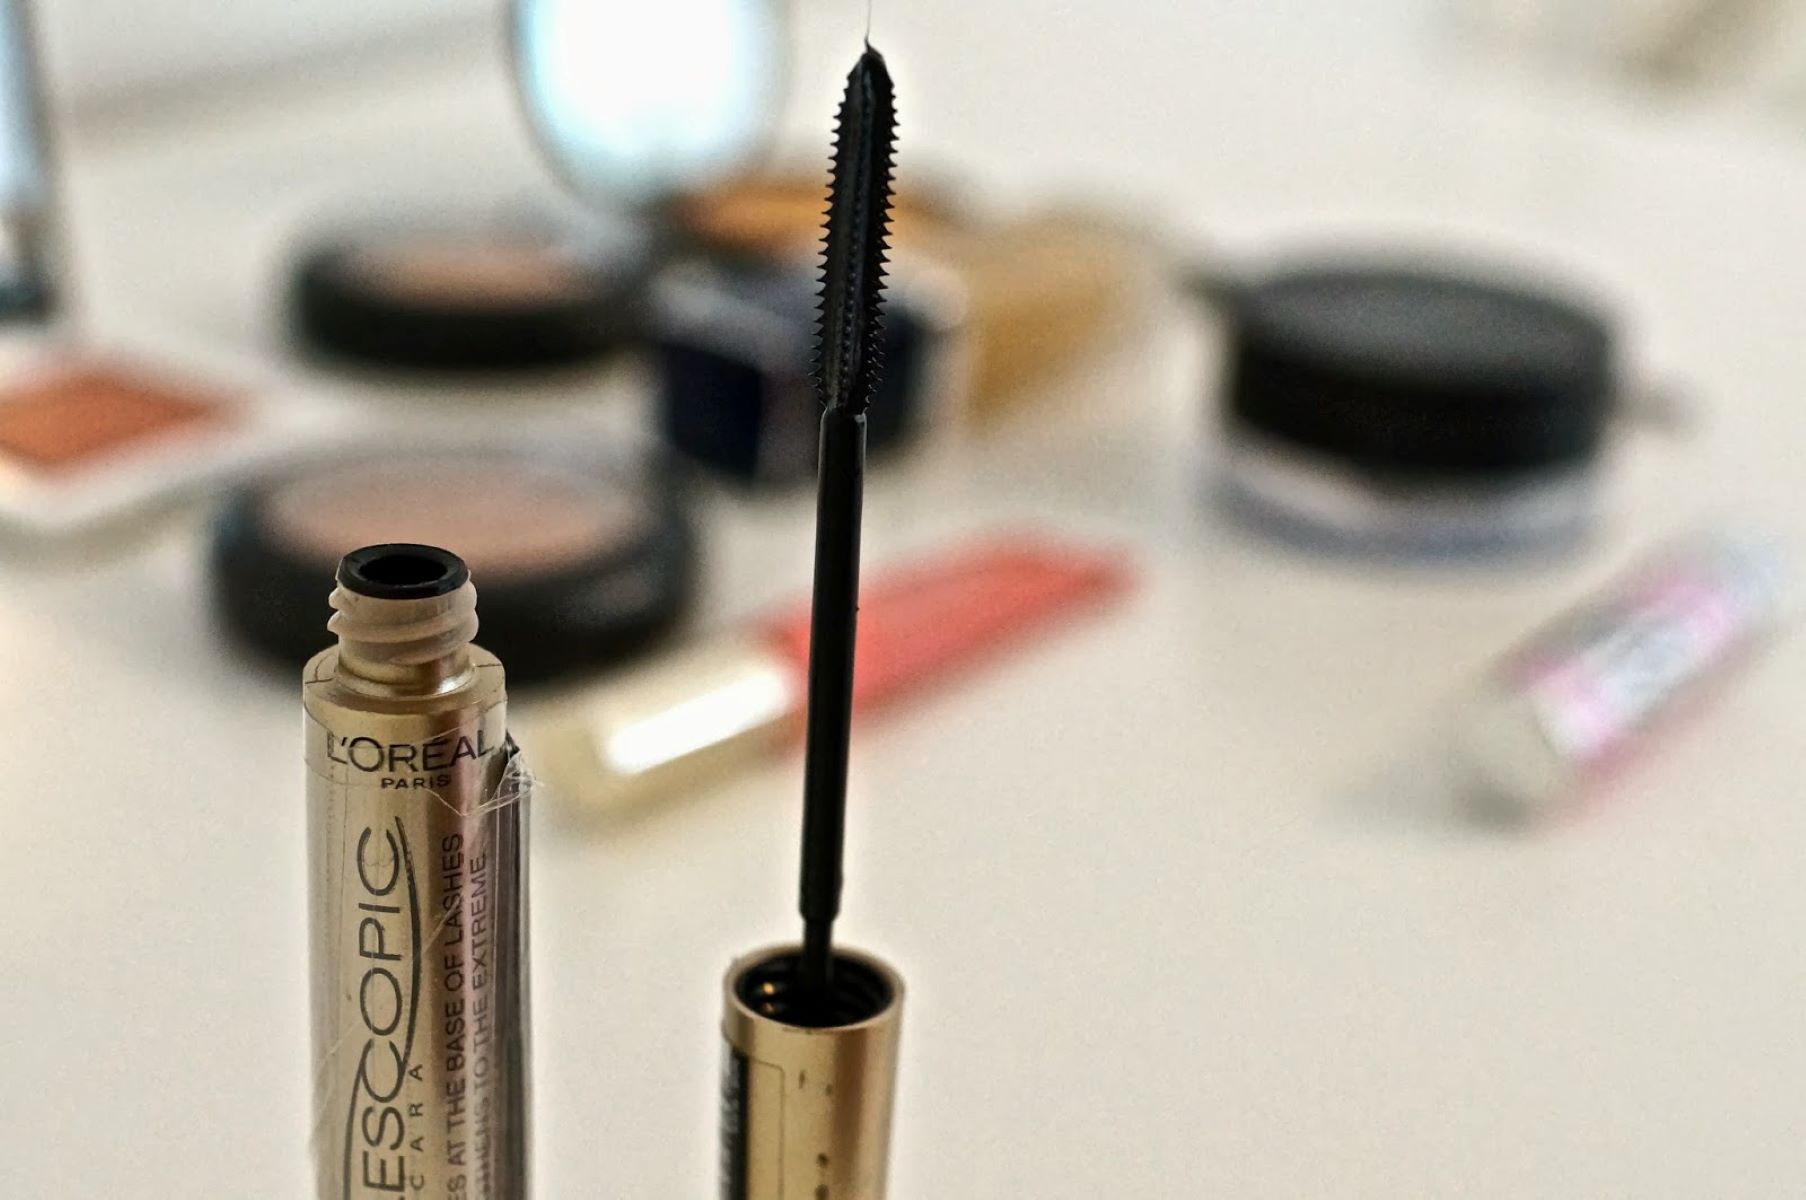 The L’Oréal Telescopic Mascara: What You Need To Know And The Best Alternatives